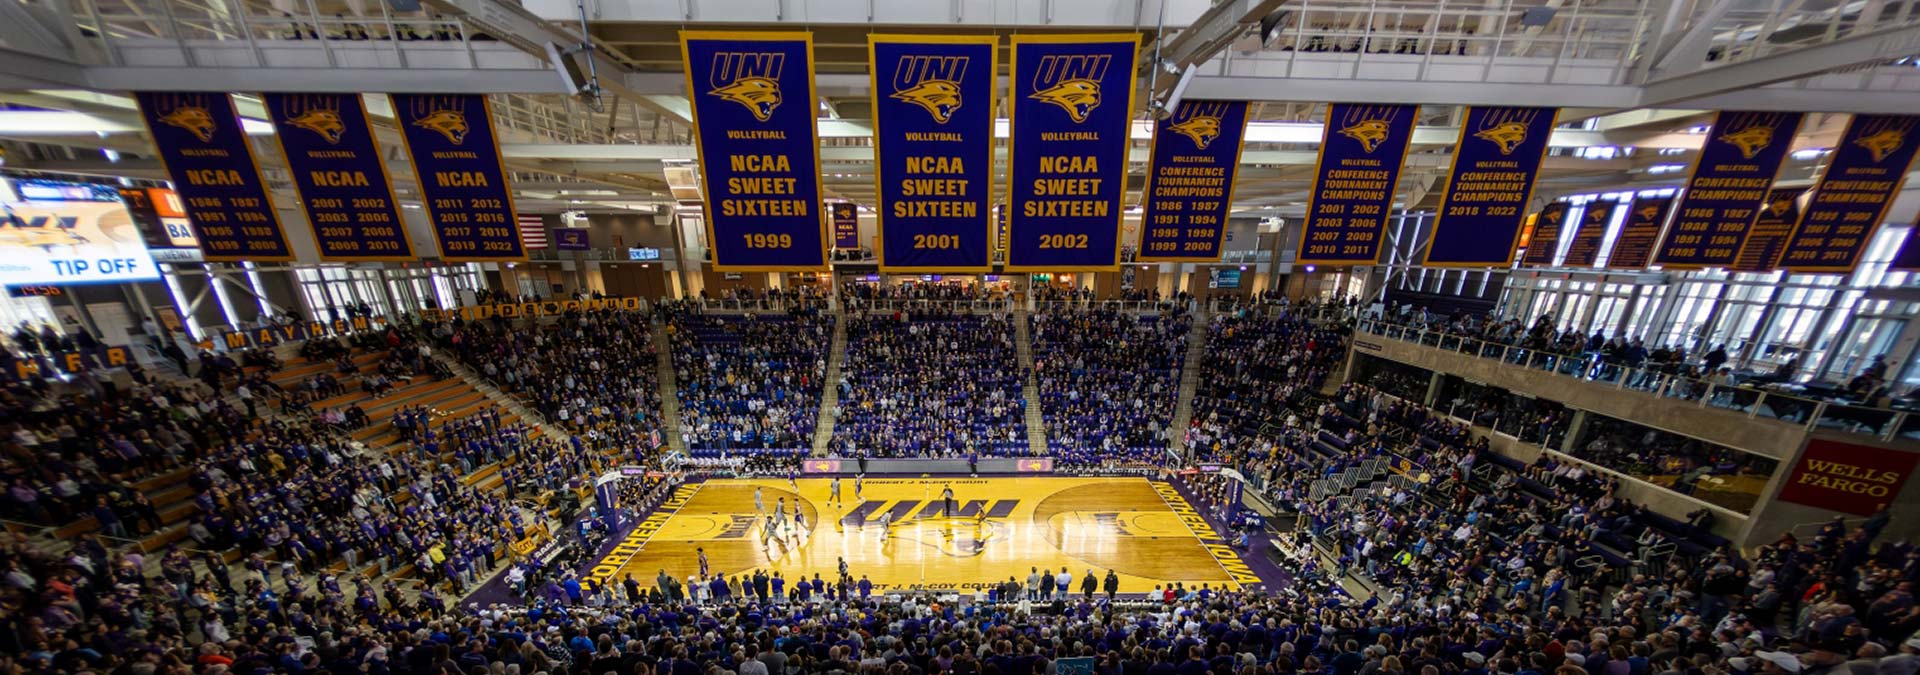 UNI McLeod Center packed during a basketball game